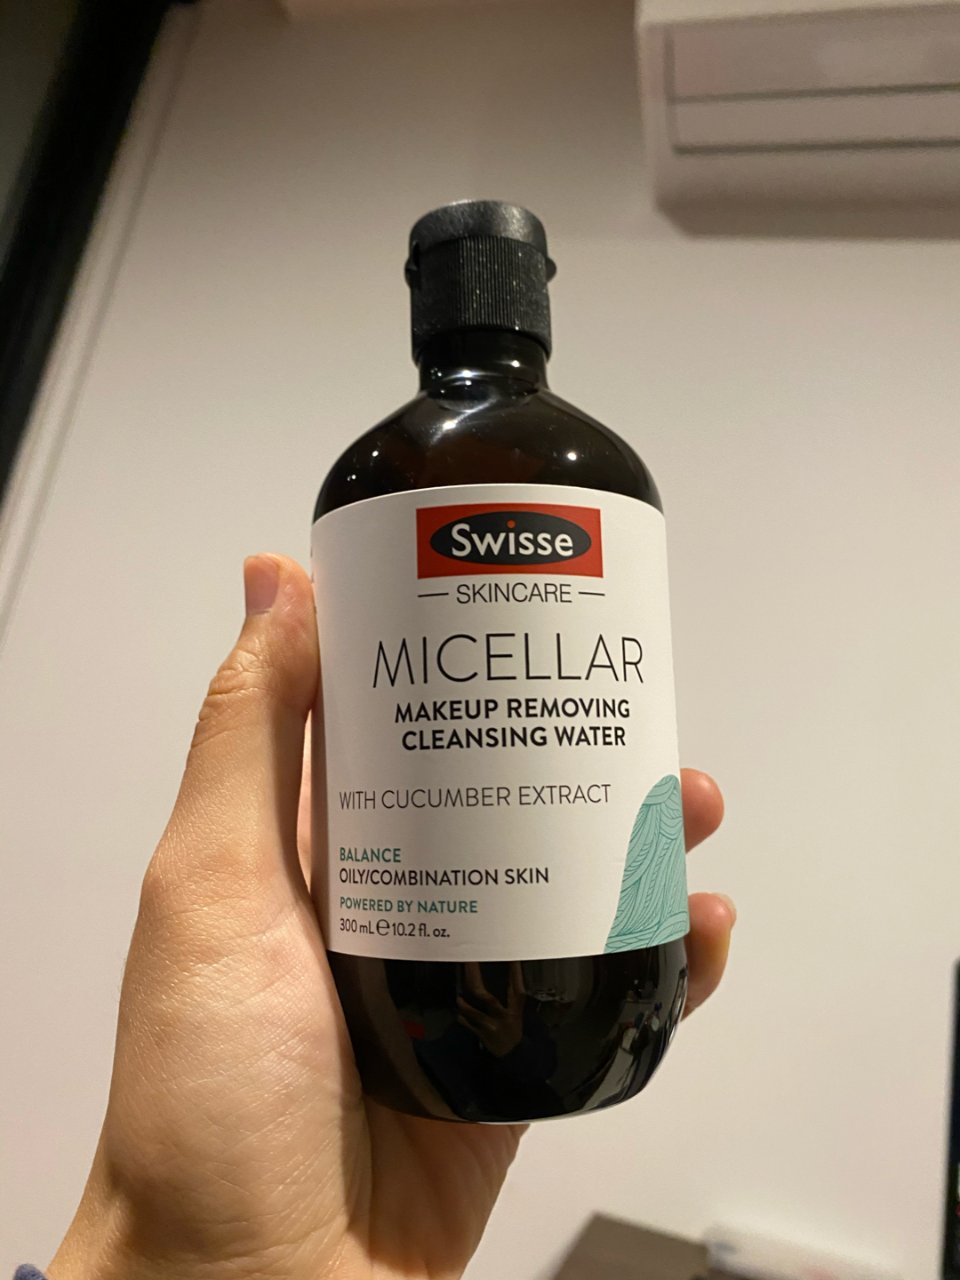 Buy Swisse Skincare Micellar Makeup Removing Cleansing Water 300ml Online at Chemist Warehouse®